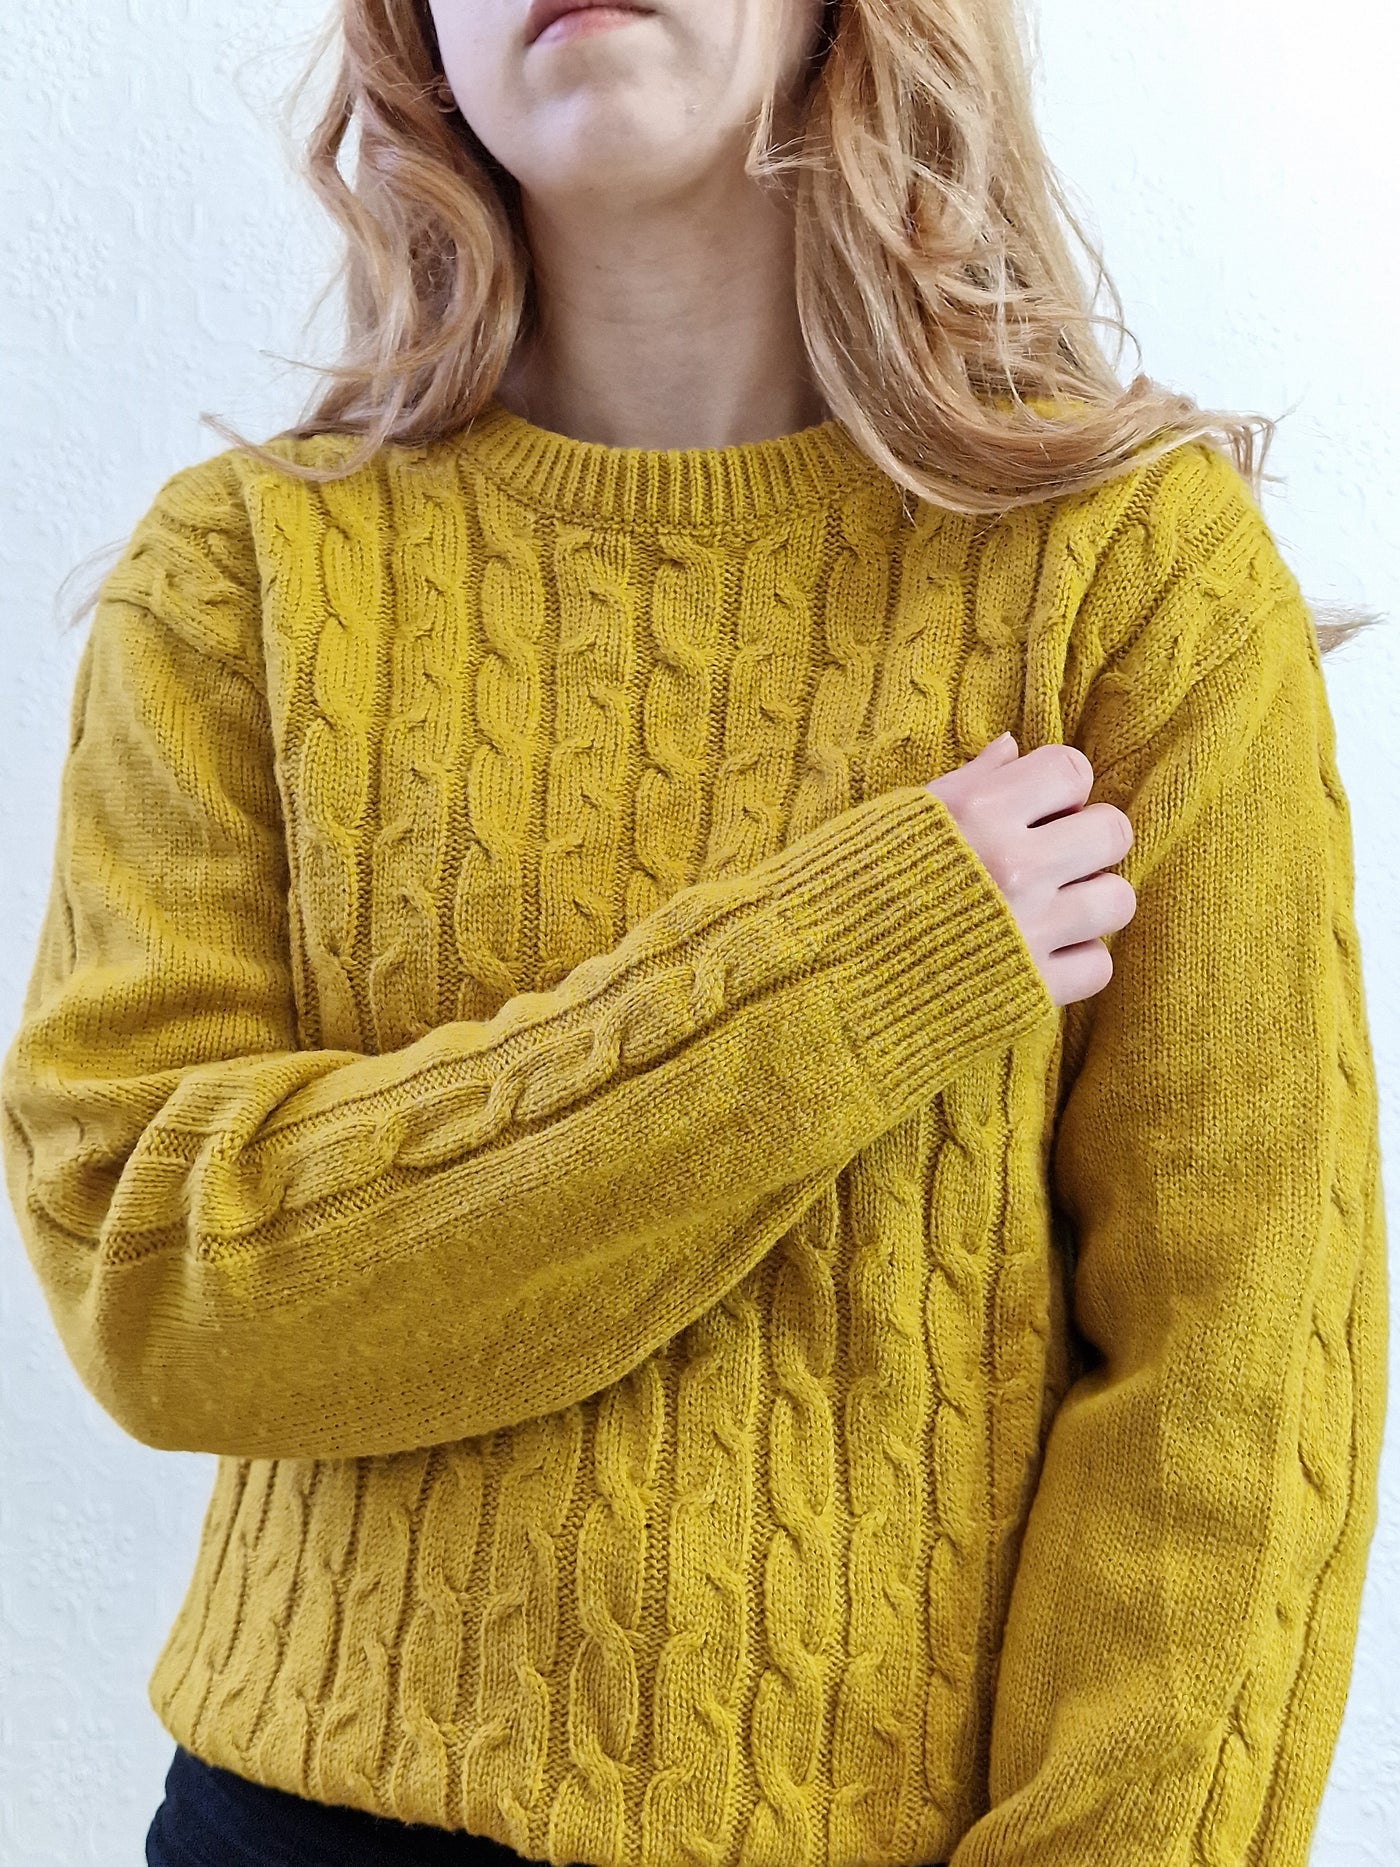 Vintage 90s Mustard Aran Style Cable Knit Jumper with Crew Neck - M/L